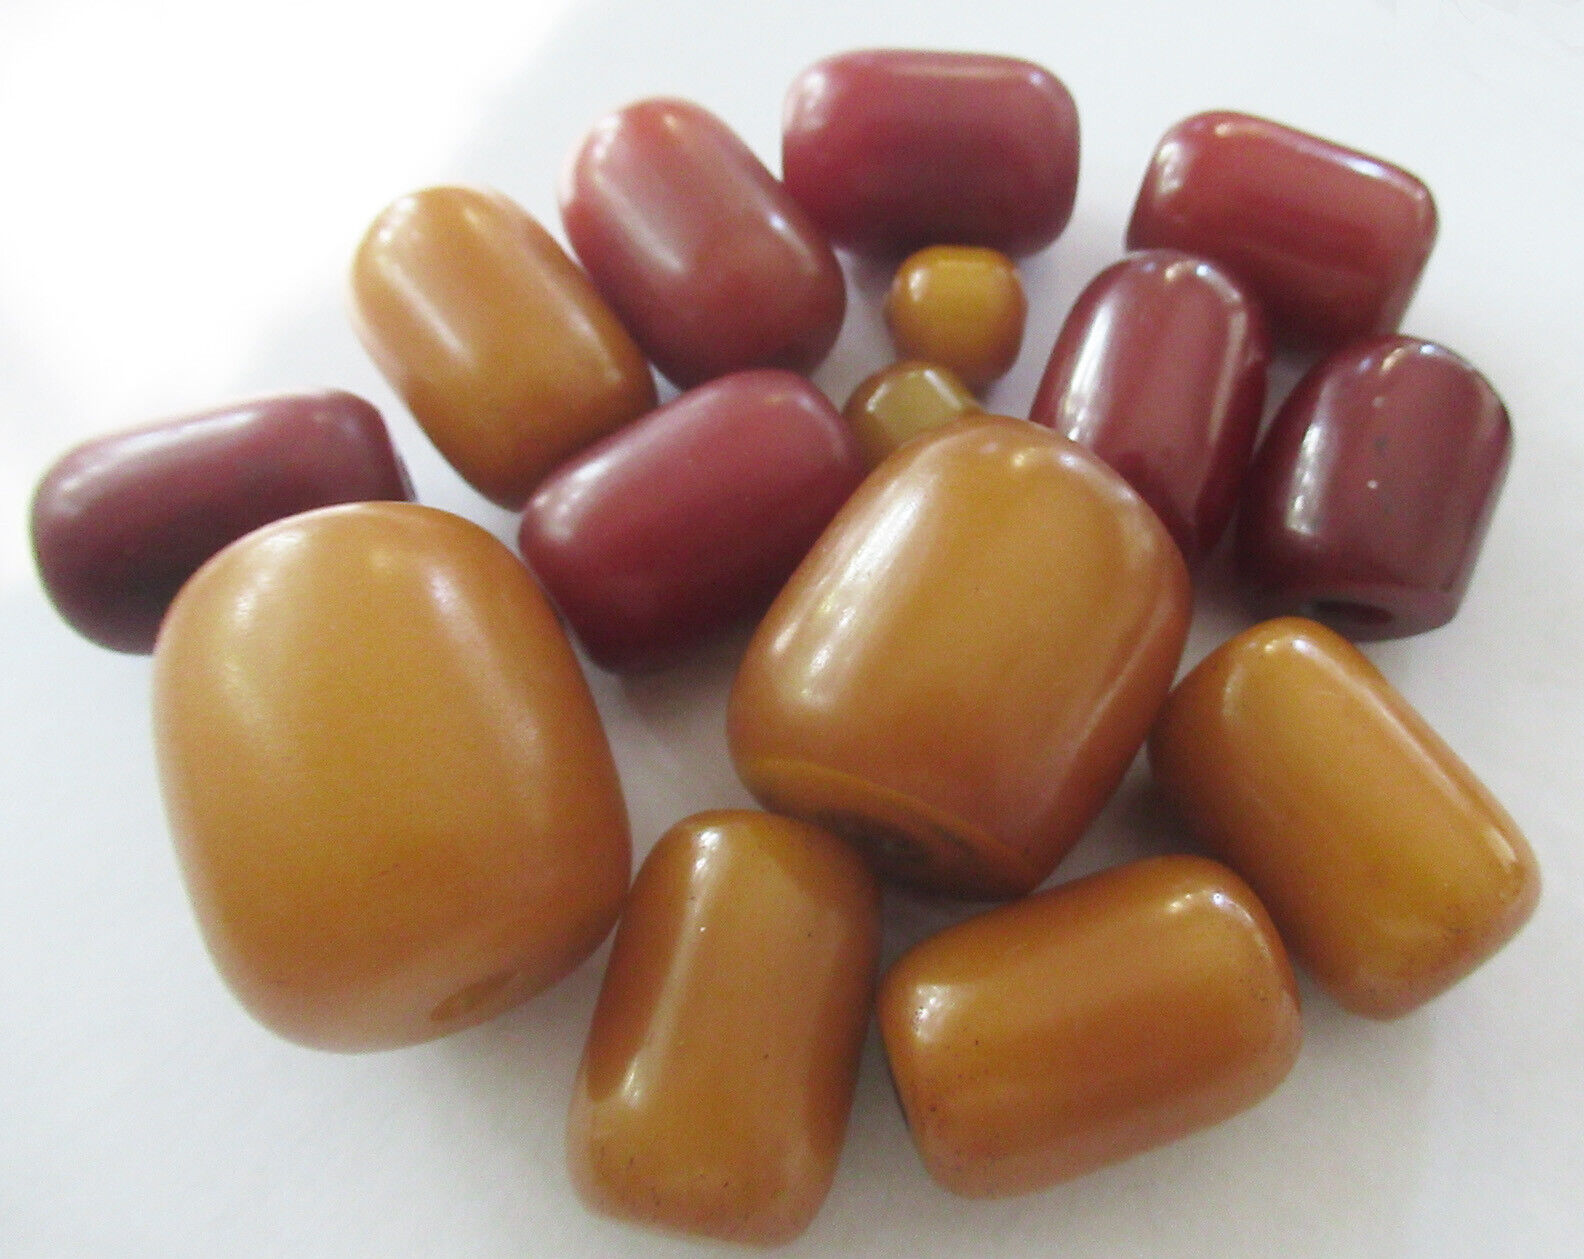 15 VINTAGE BAKELITE BEADS - 72 GRAMS - 1.10 by .945 INCHES, .91 BY .63 INCHES